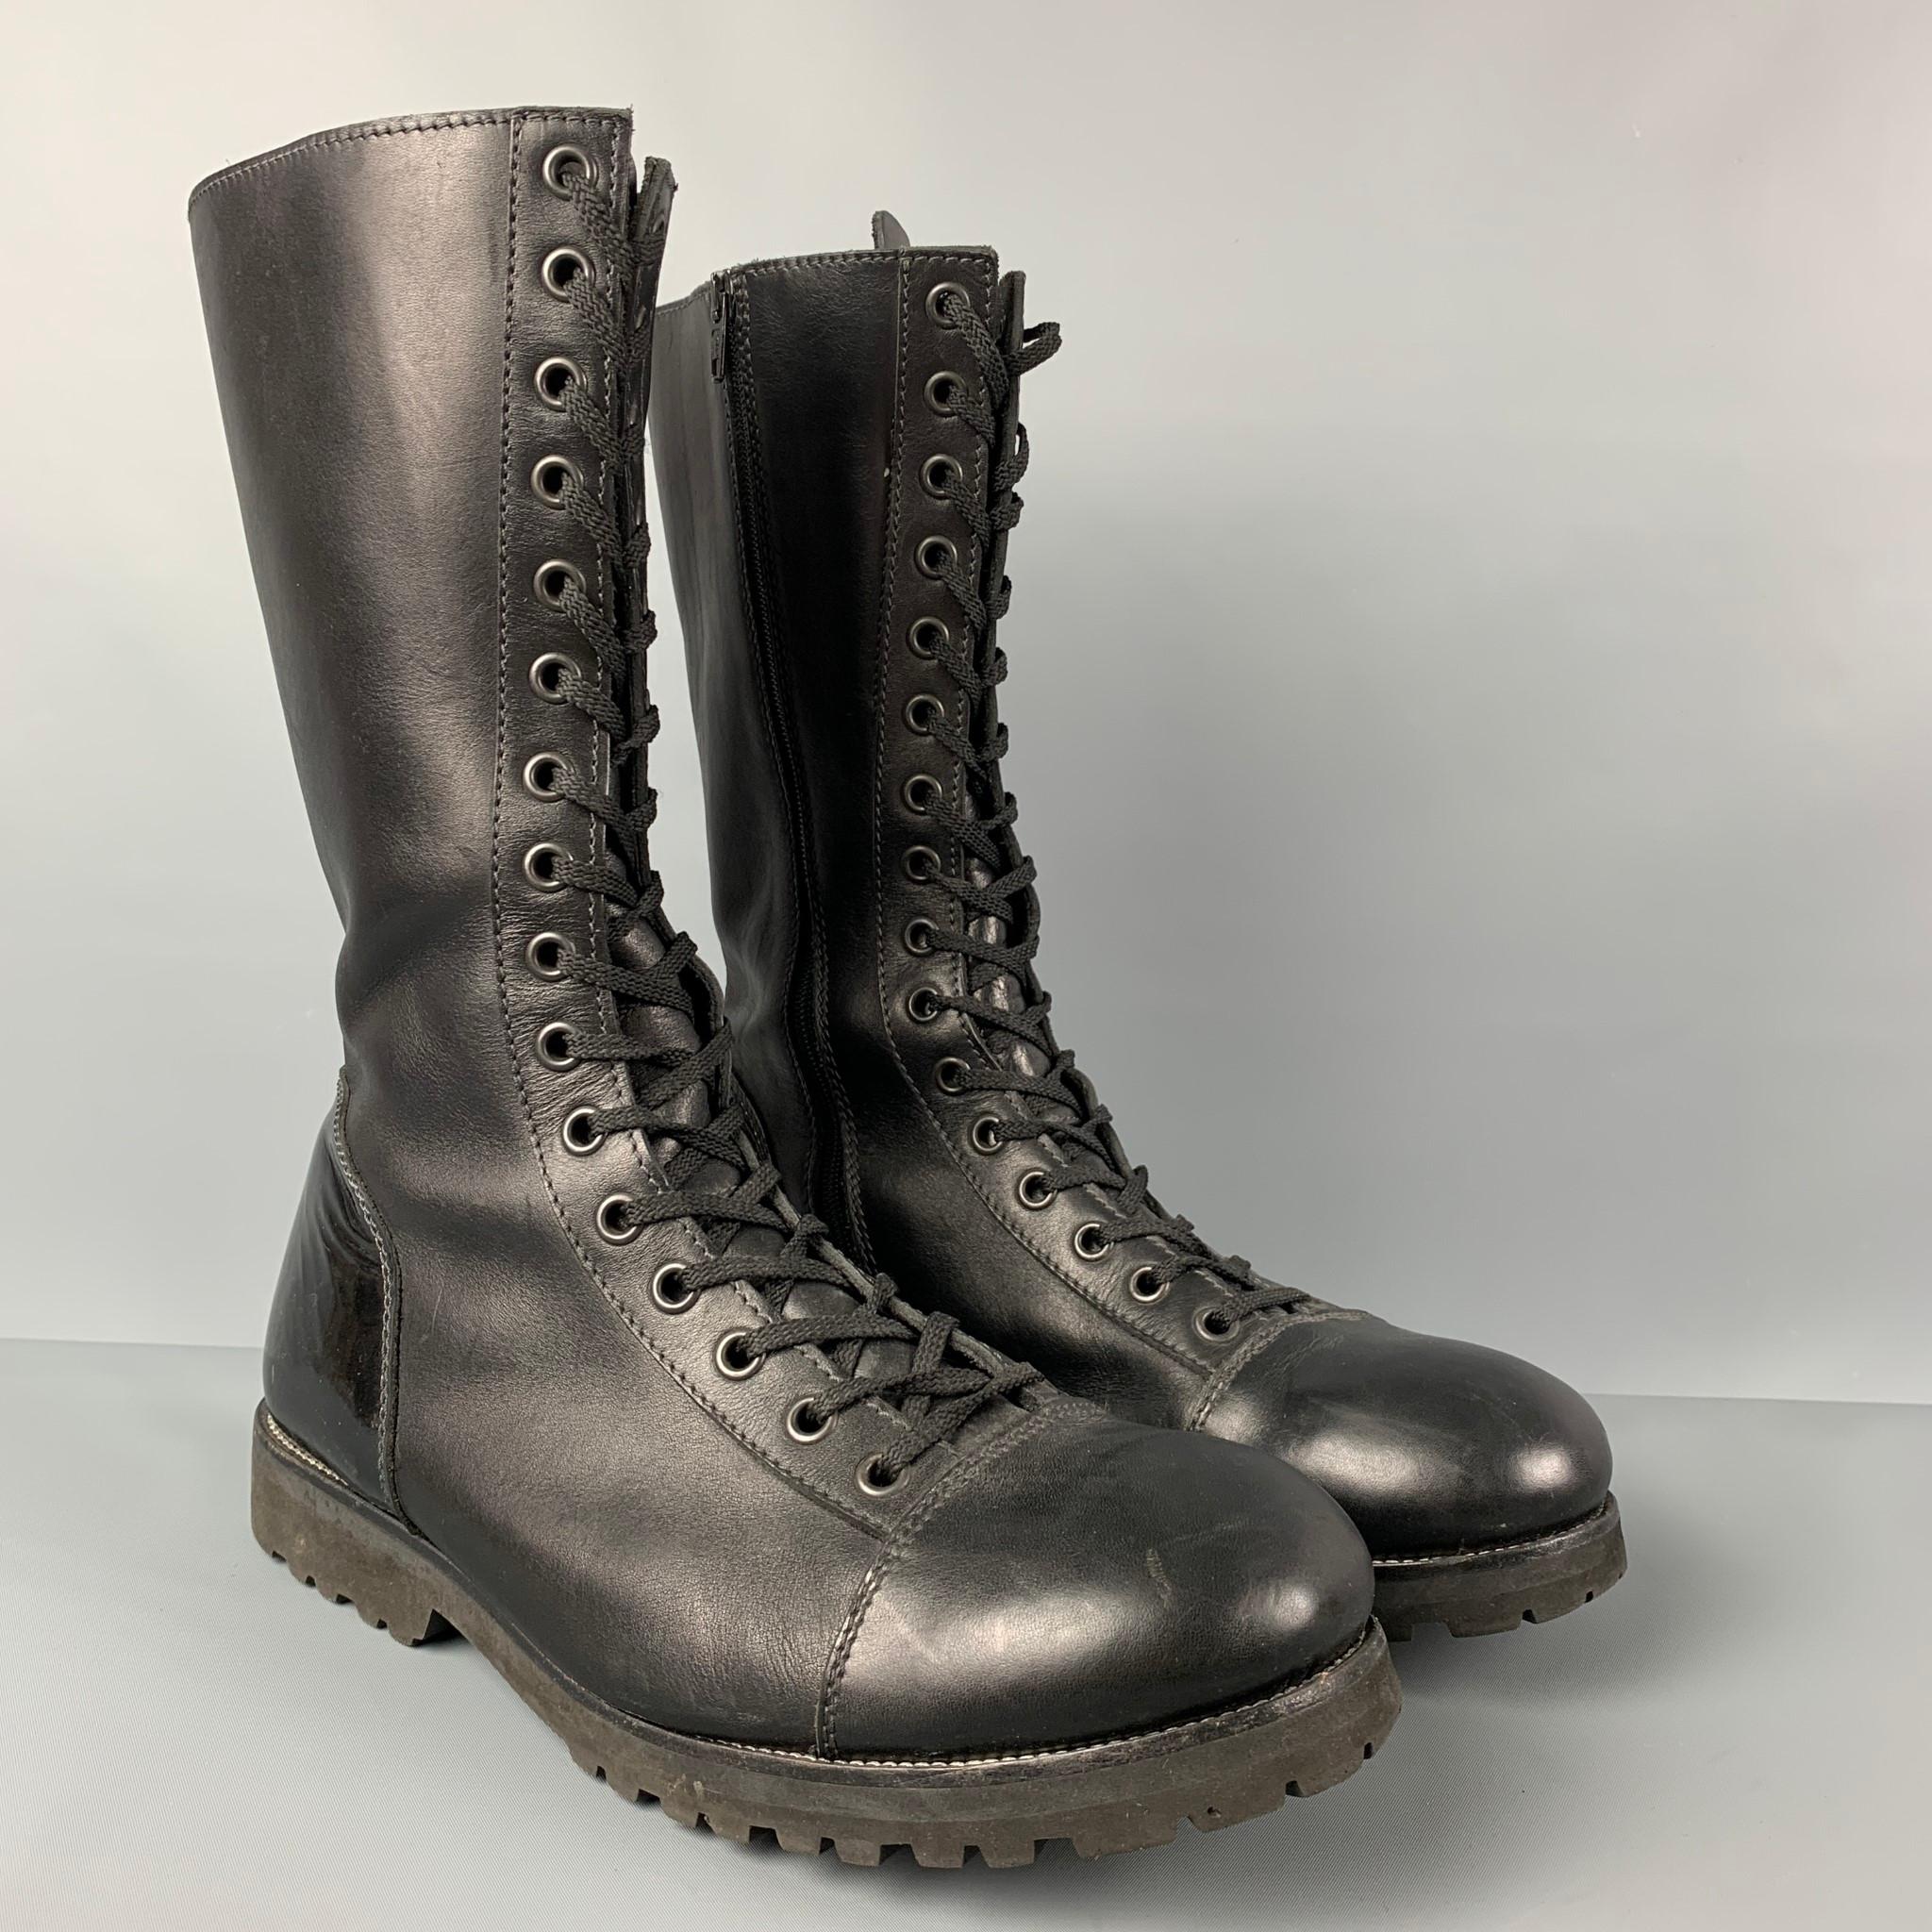 EMPORIO ARMANI boots comes in a black leather with a patent leather trim featuring a combat style and a lace up closure. 

Very Good Pre-Owned Condition.
Marked: 45

Measurements:

Length: 13 in.
Width: 4 in.
Height: 12 in. 